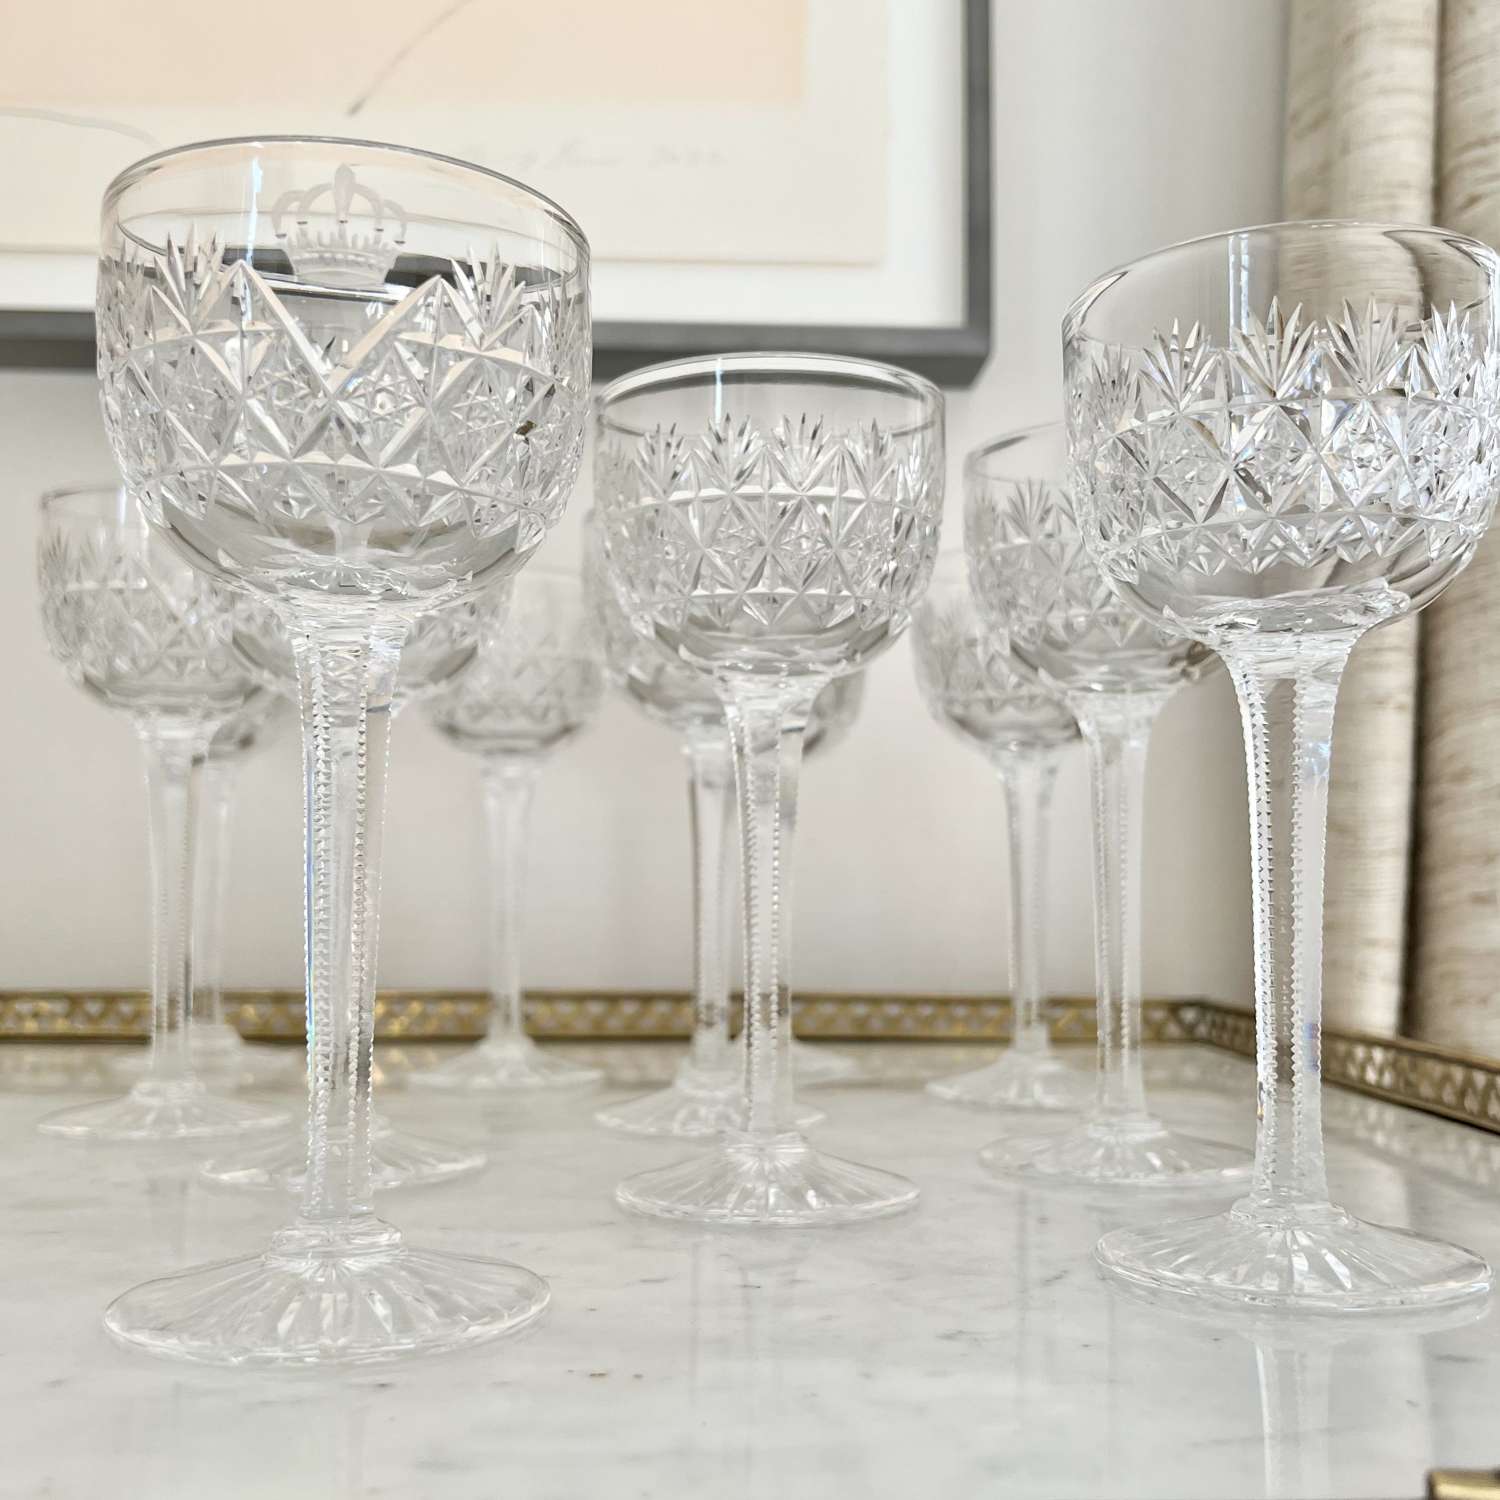 11 Crown Etched Crystal Tall Stem Wine Glasses